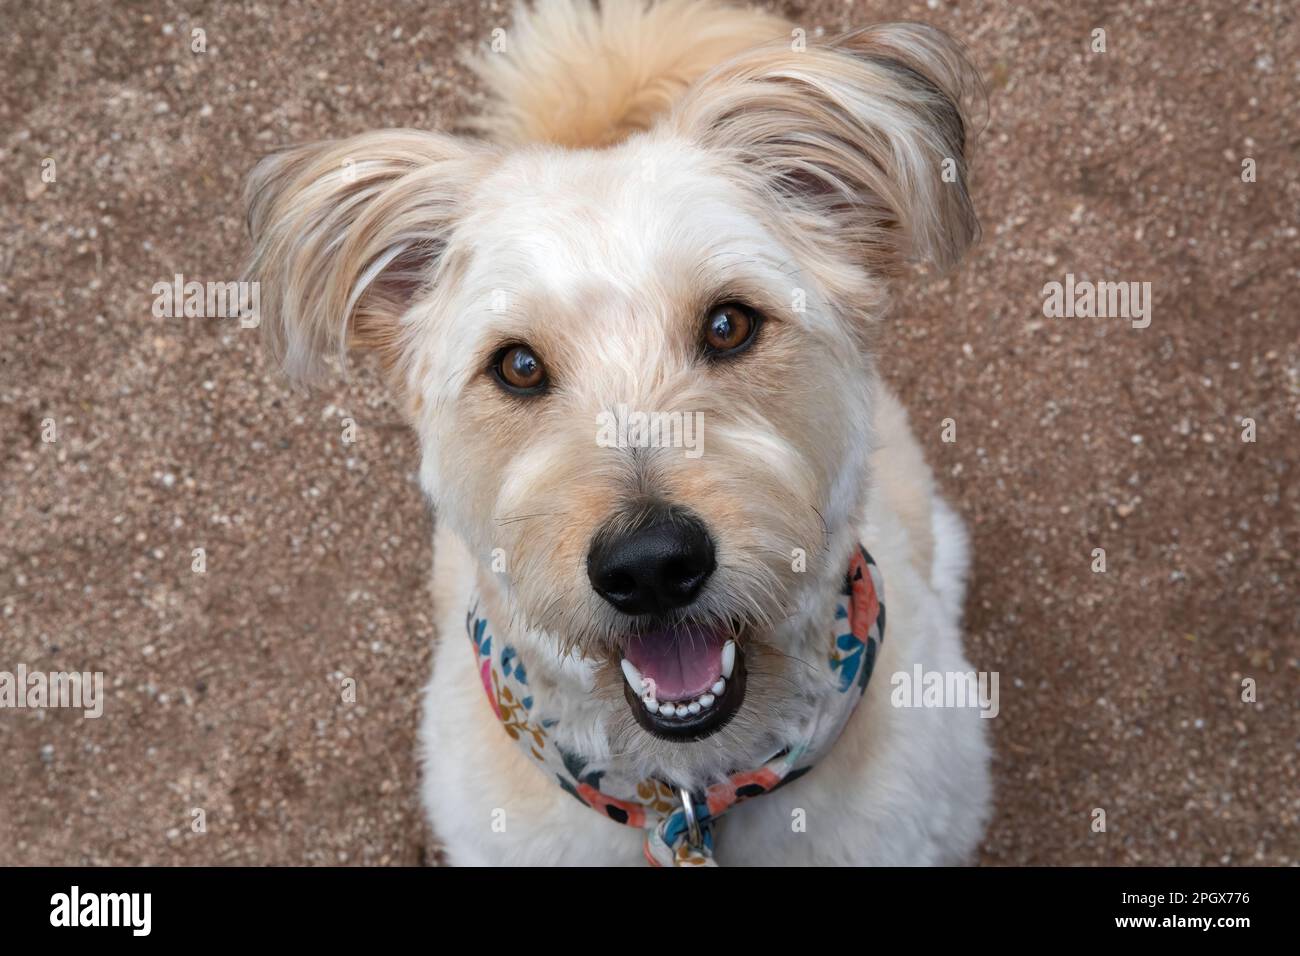 Cute dog, poodle mix, looking at camera. Stock Photo